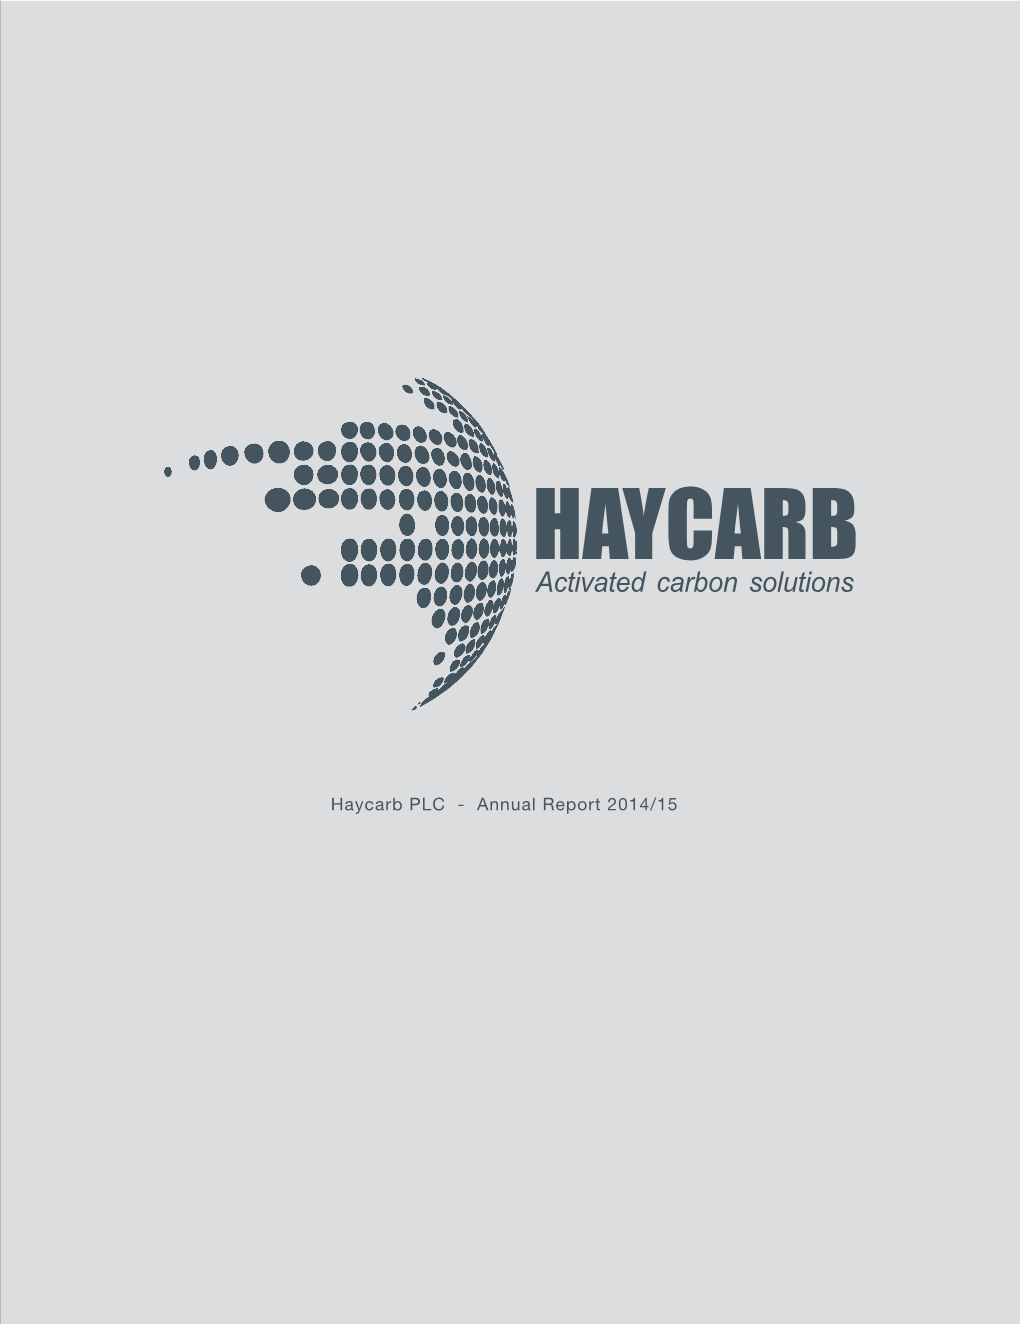 Haycarb Is One of the World’S Foremost Producers of Coconut Shell Based Activated Carbon